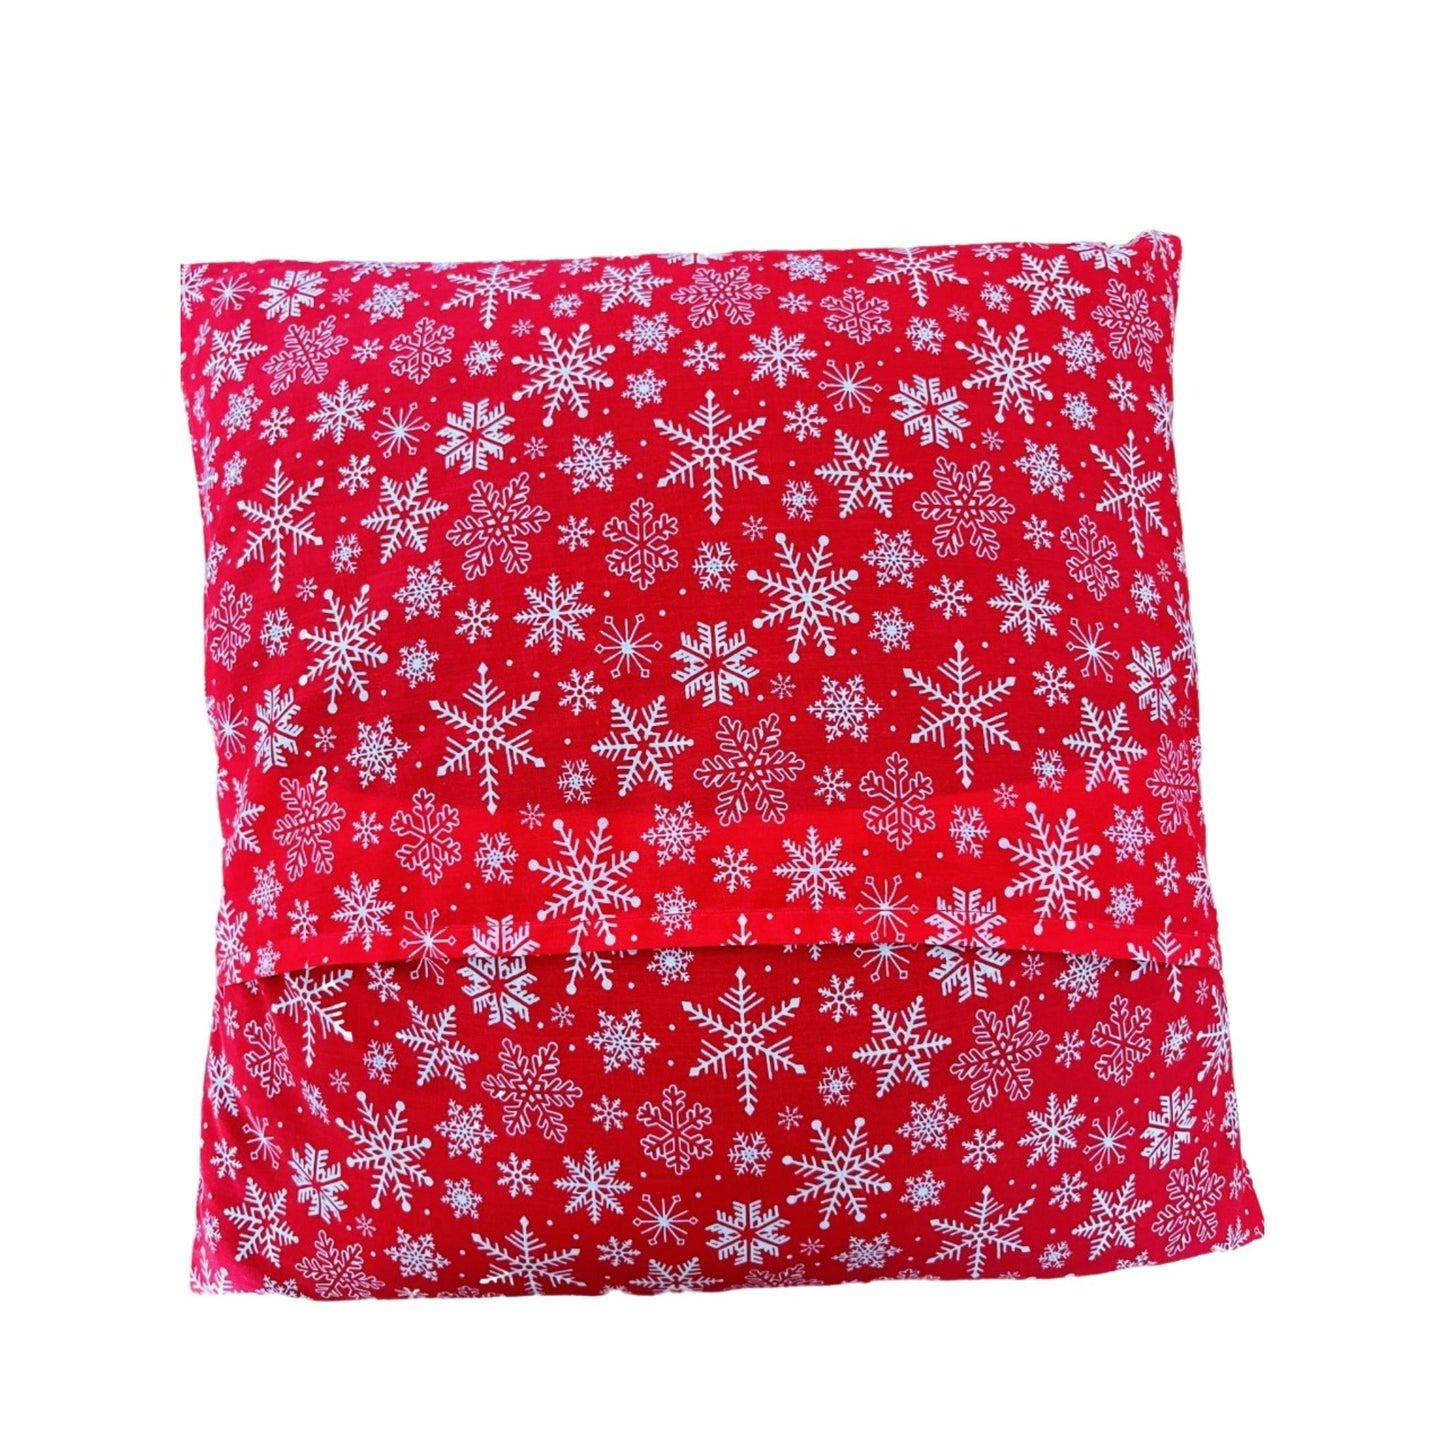 Back view of Christmas envelope cushion cover red snowflake E for Eva